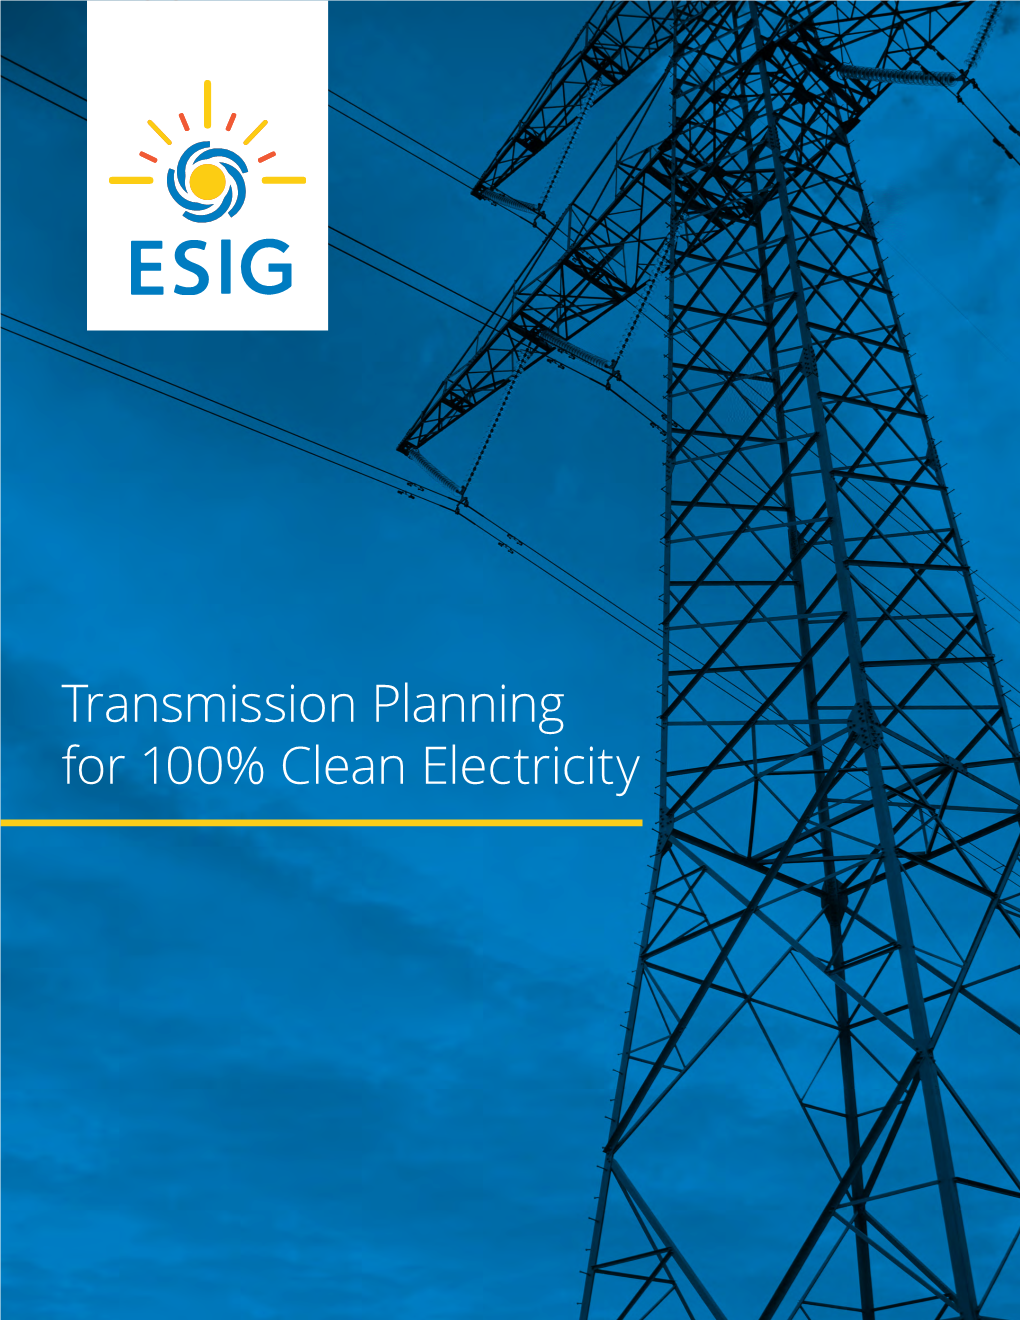 Transmission Planning for 100% Clean Electricity